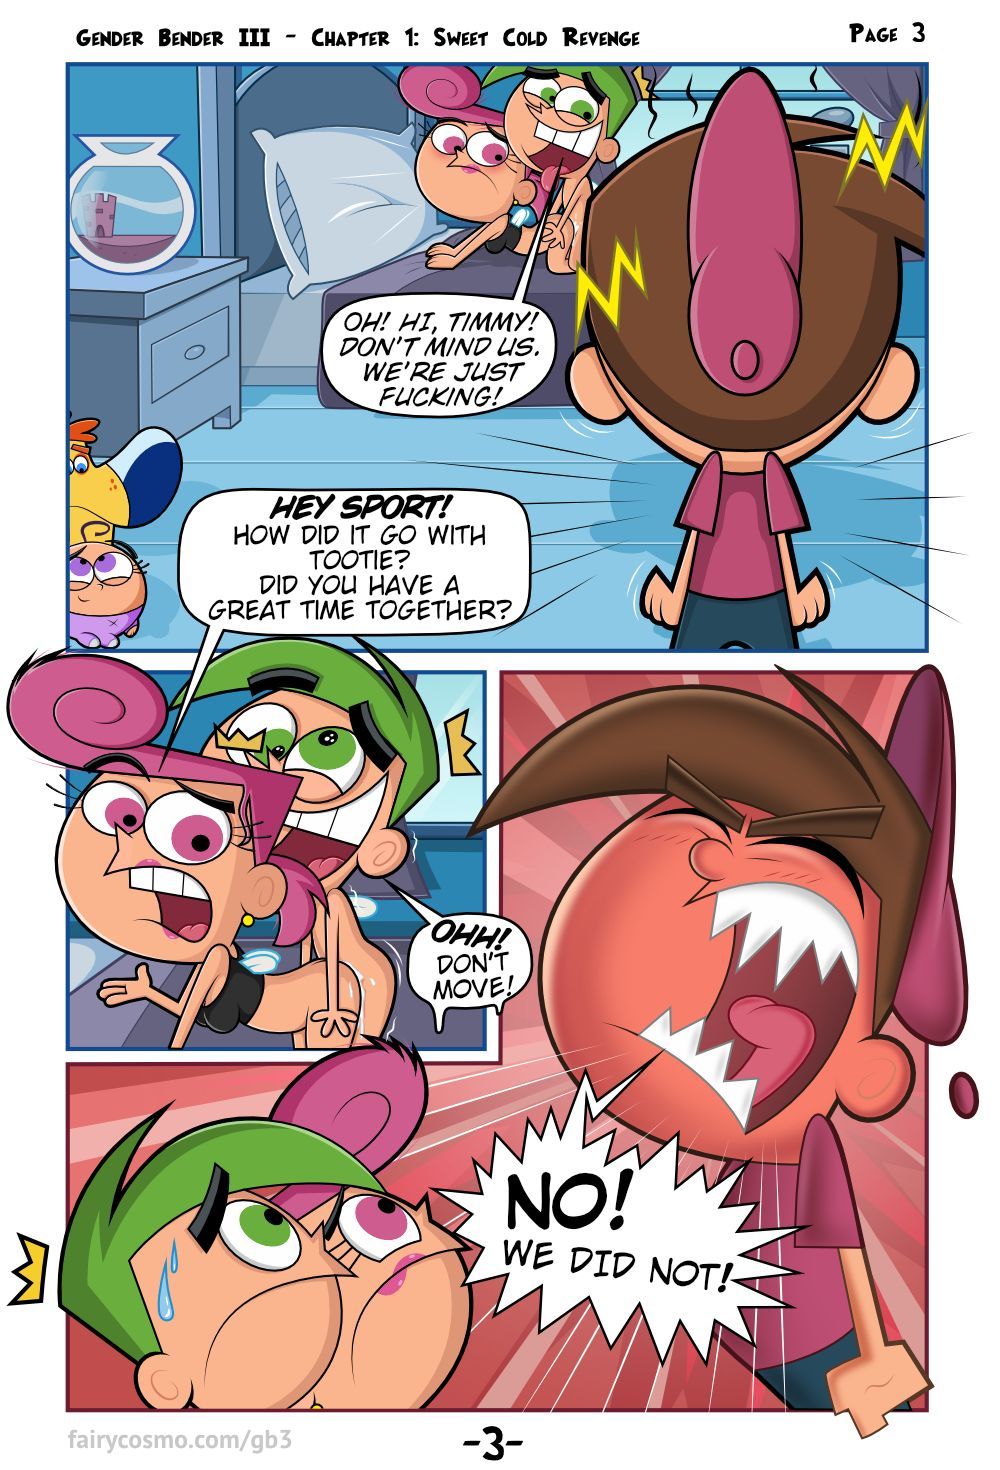 Fairly OddParents - Gender Bender III (Fairycosmo) page 4